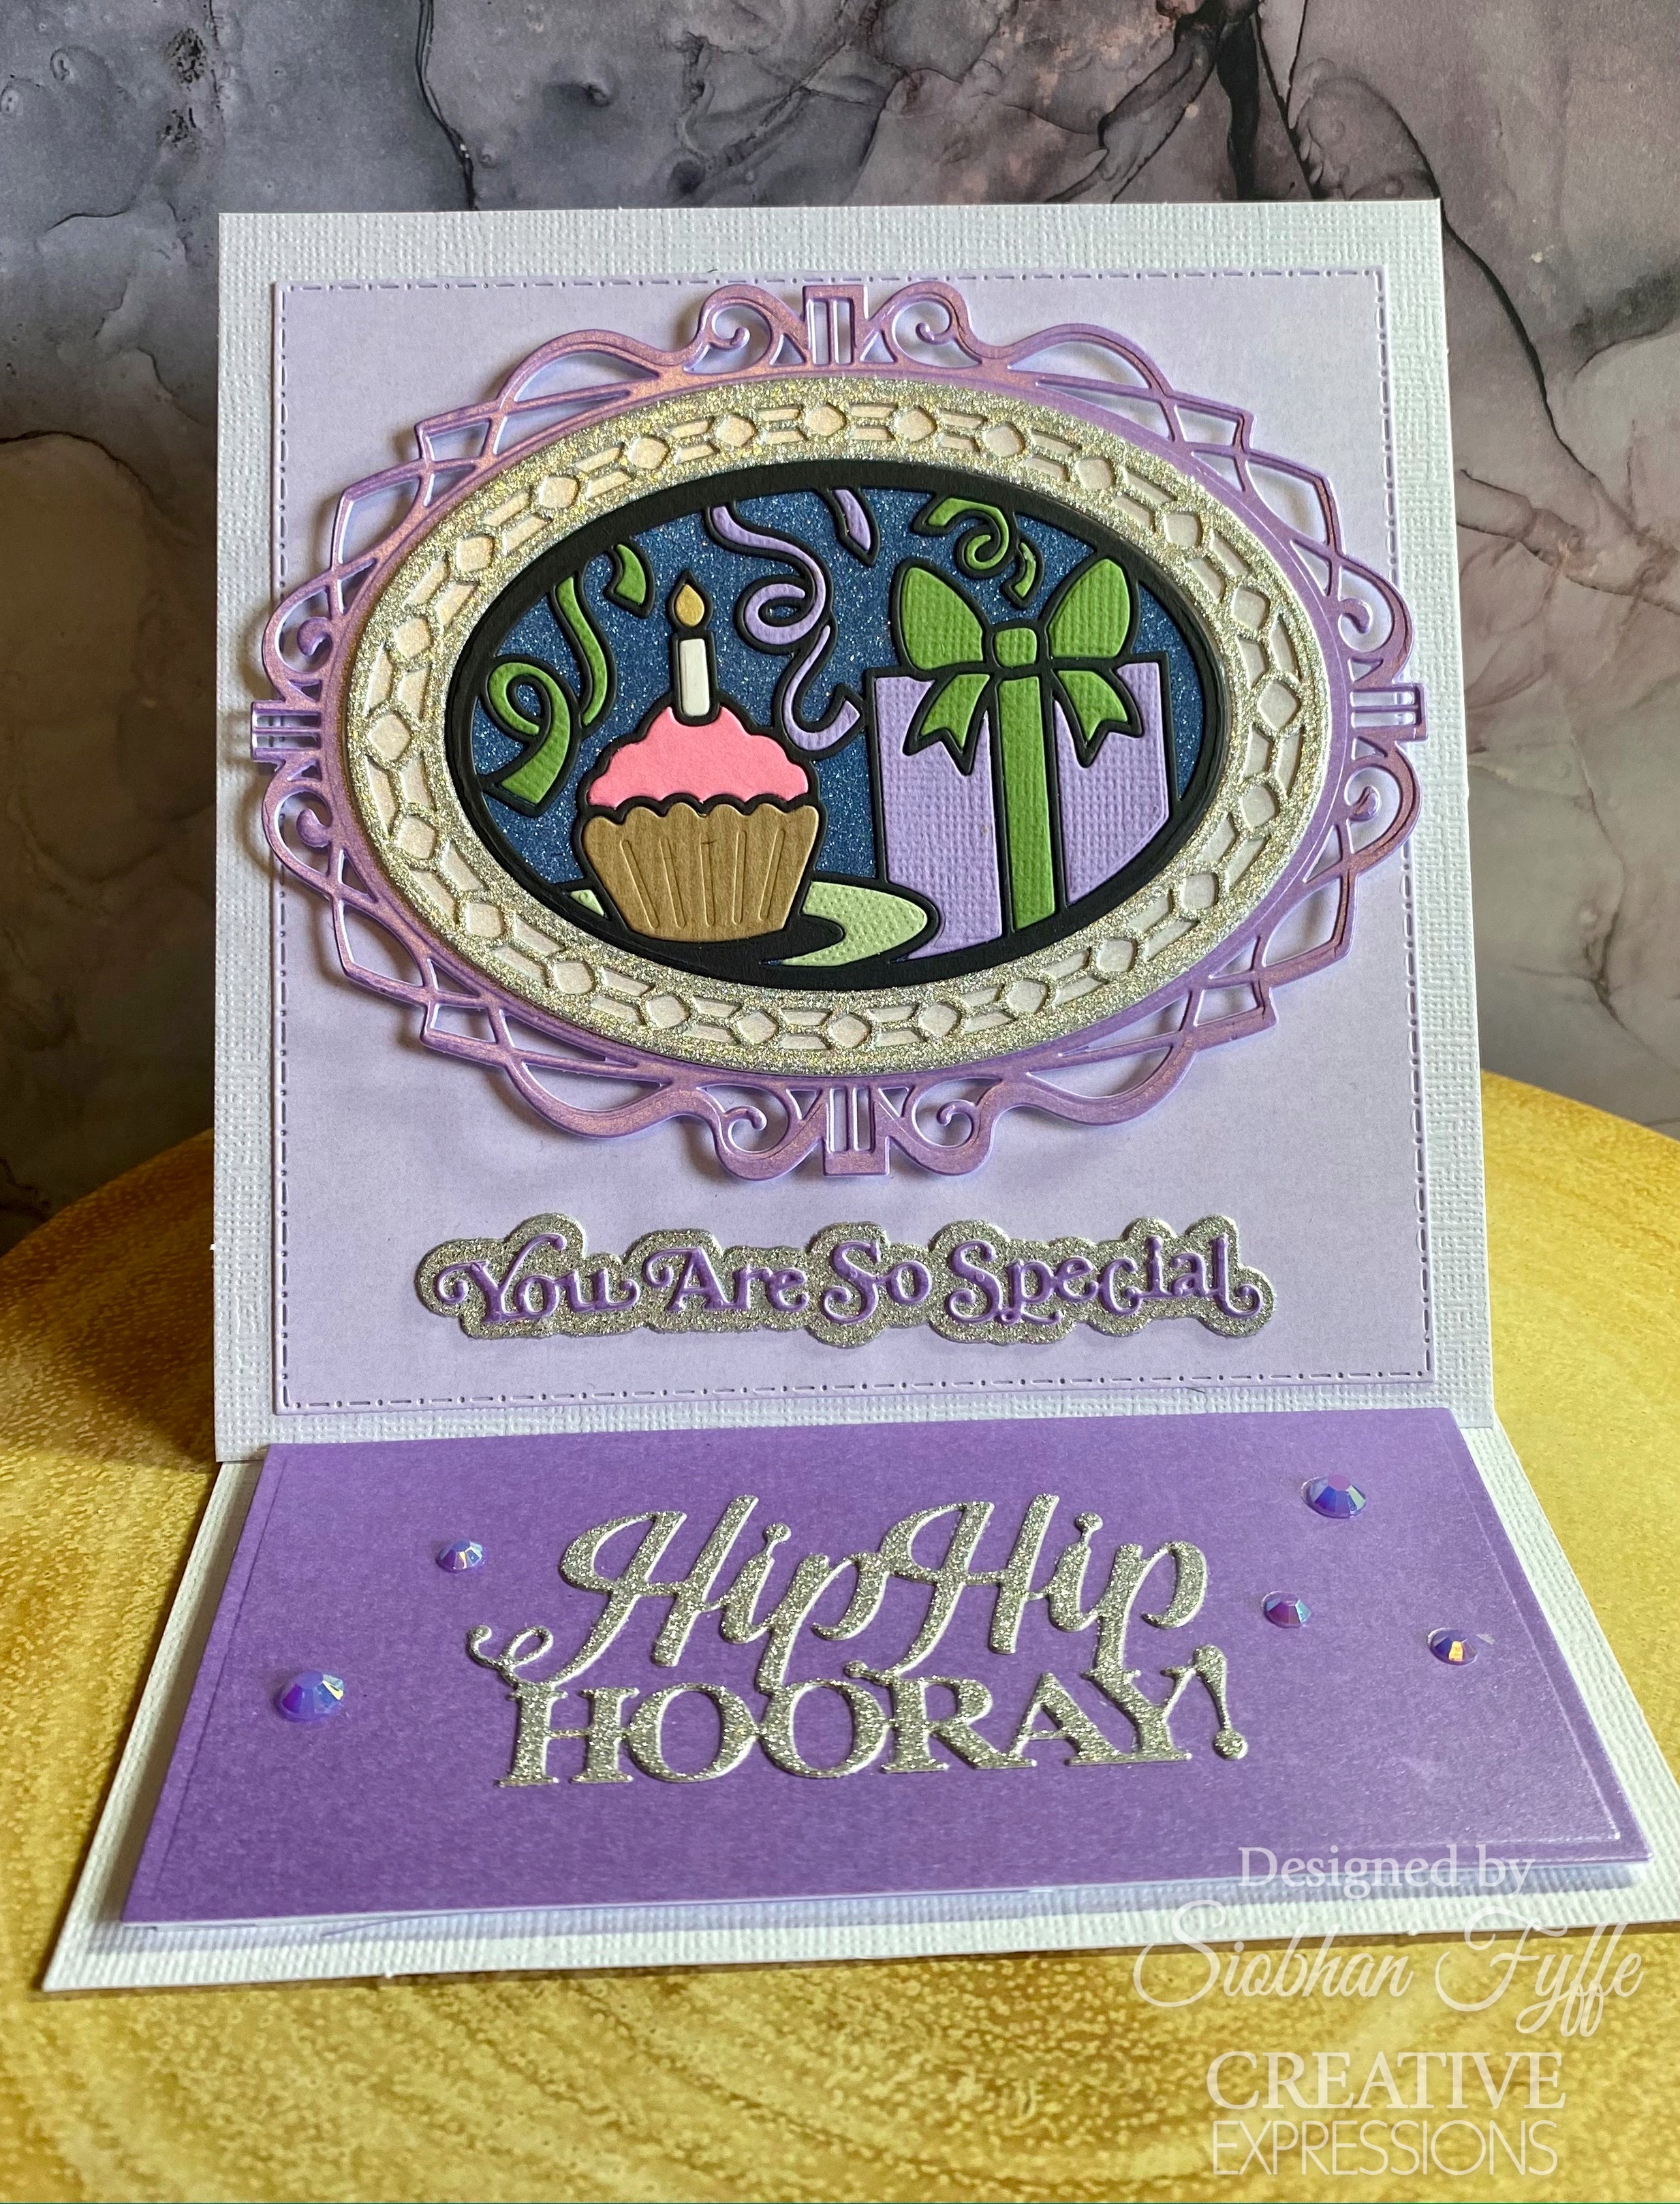 Creative Expressions Sue Wilson Mini Shadowed Sentiments You Are So Special Craft Die